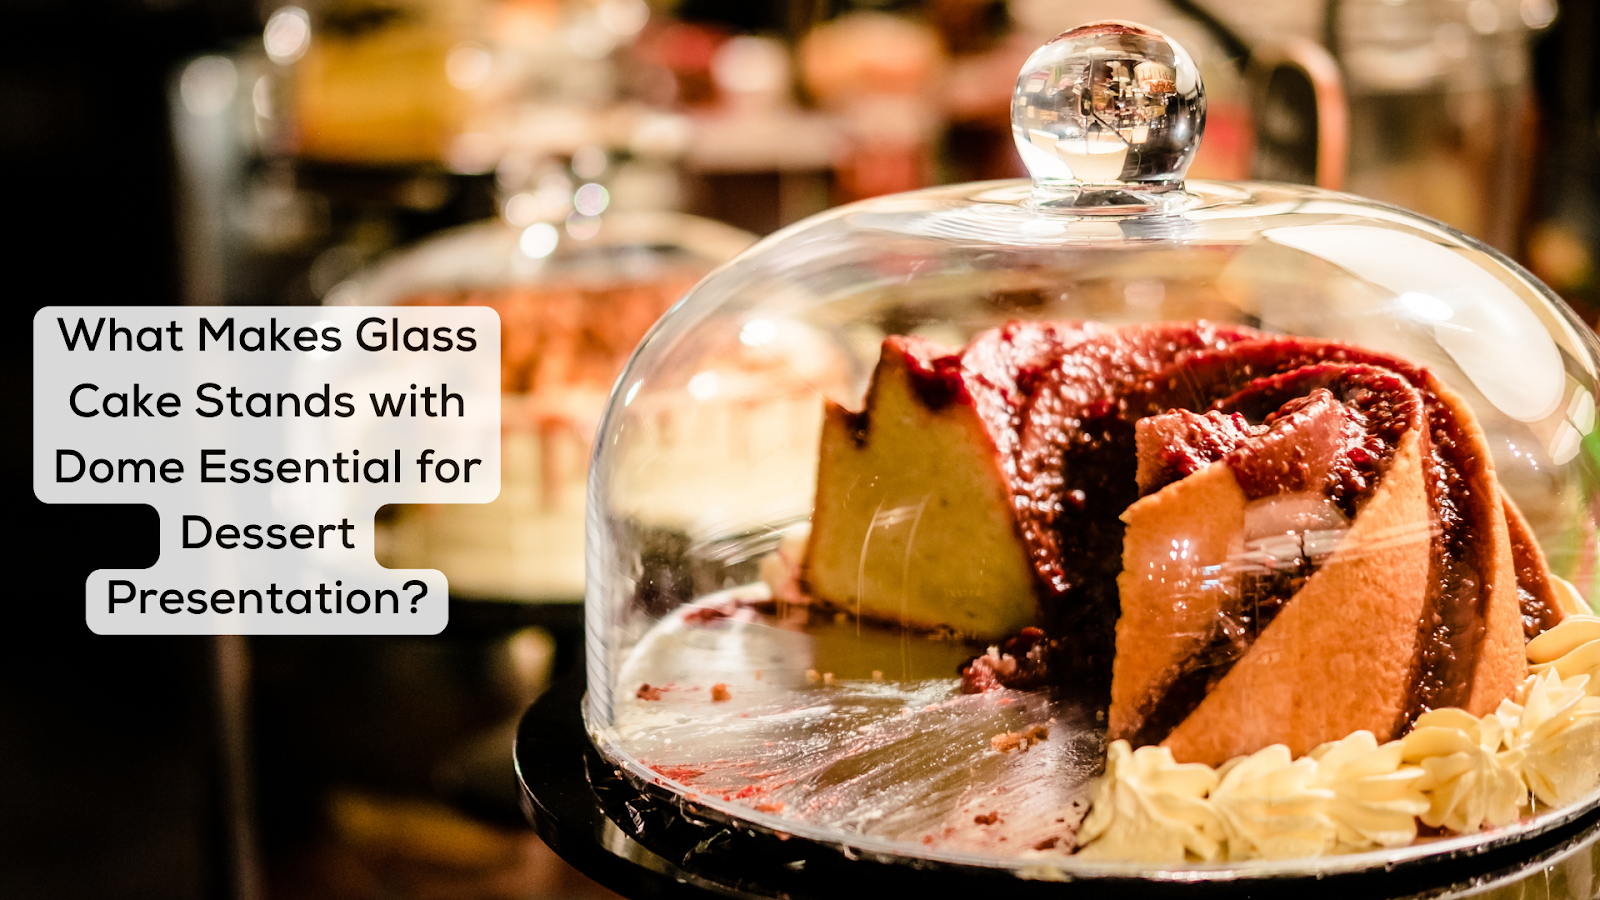 What Makes Glass Cake Stands with Dome Essential for Dessert Presentation?